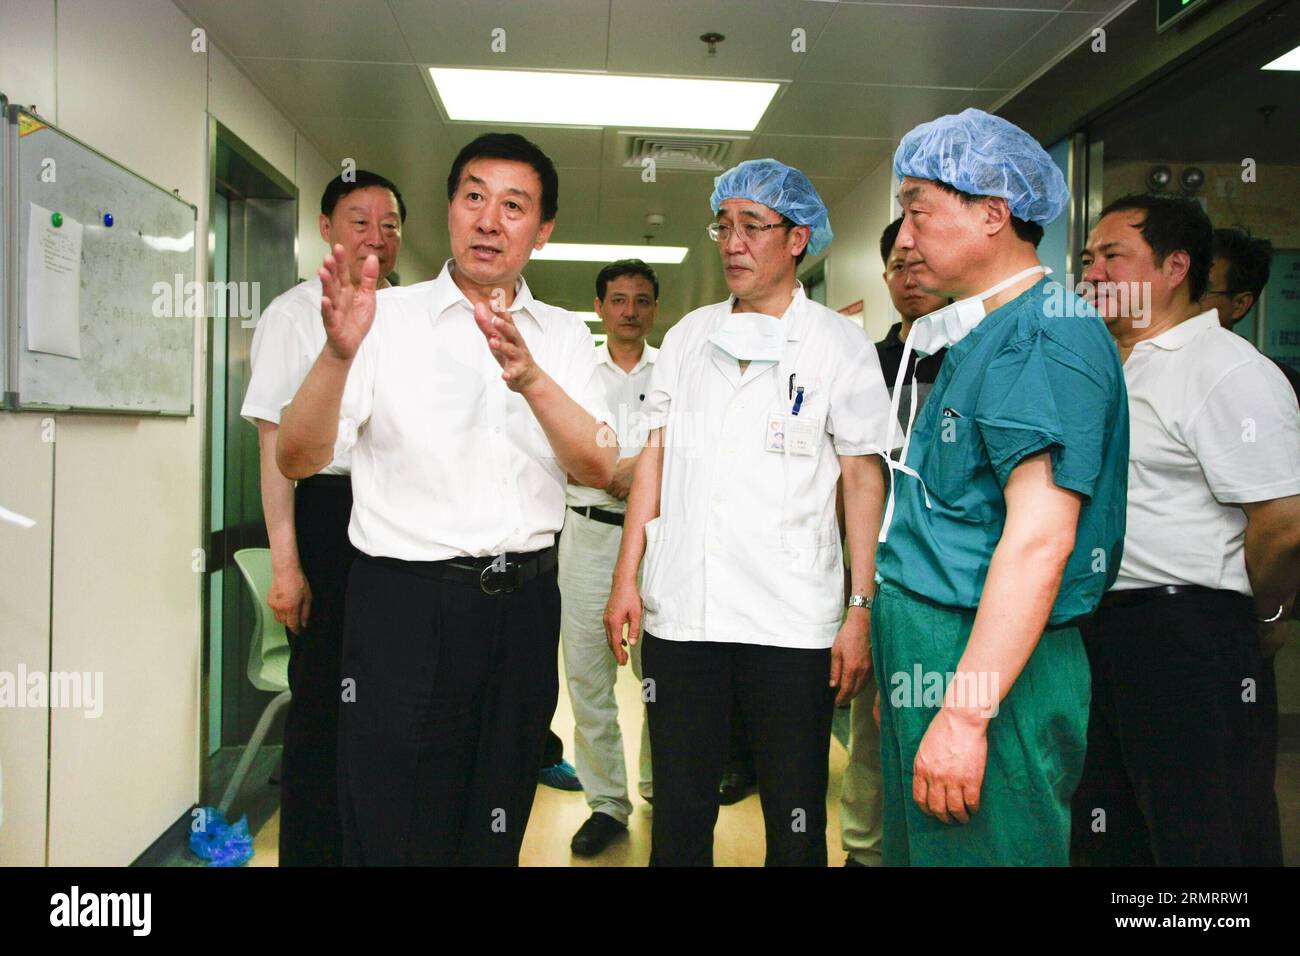 (140802) -- SUZHOU, Aug. 2, 2014 -- Chinese State Councilor Wang Yong (L front) talks with medical staff members at the Second Affiliated Hospital of Soochow University in Suzhou City, east China s Jiangsu Province, Aug. 2, 2014. A powerful factory blast has killed 69 people and injured over 180 others in Kunshan on Saturday morning. Chinese President Xi Jinping and Premier Li Keqiang have assigned Wang Yong to lead a State Council working team to Kunshan to look into the accident. ) (wjq) CHINA-JIANGSU-KUNSHAN-FACTORY BLAST-WANG YONG (CN) ChenxYichen PUBLICATIONxNOTxINxCHN   Suzhou Aug 2 2014 Stock Photo